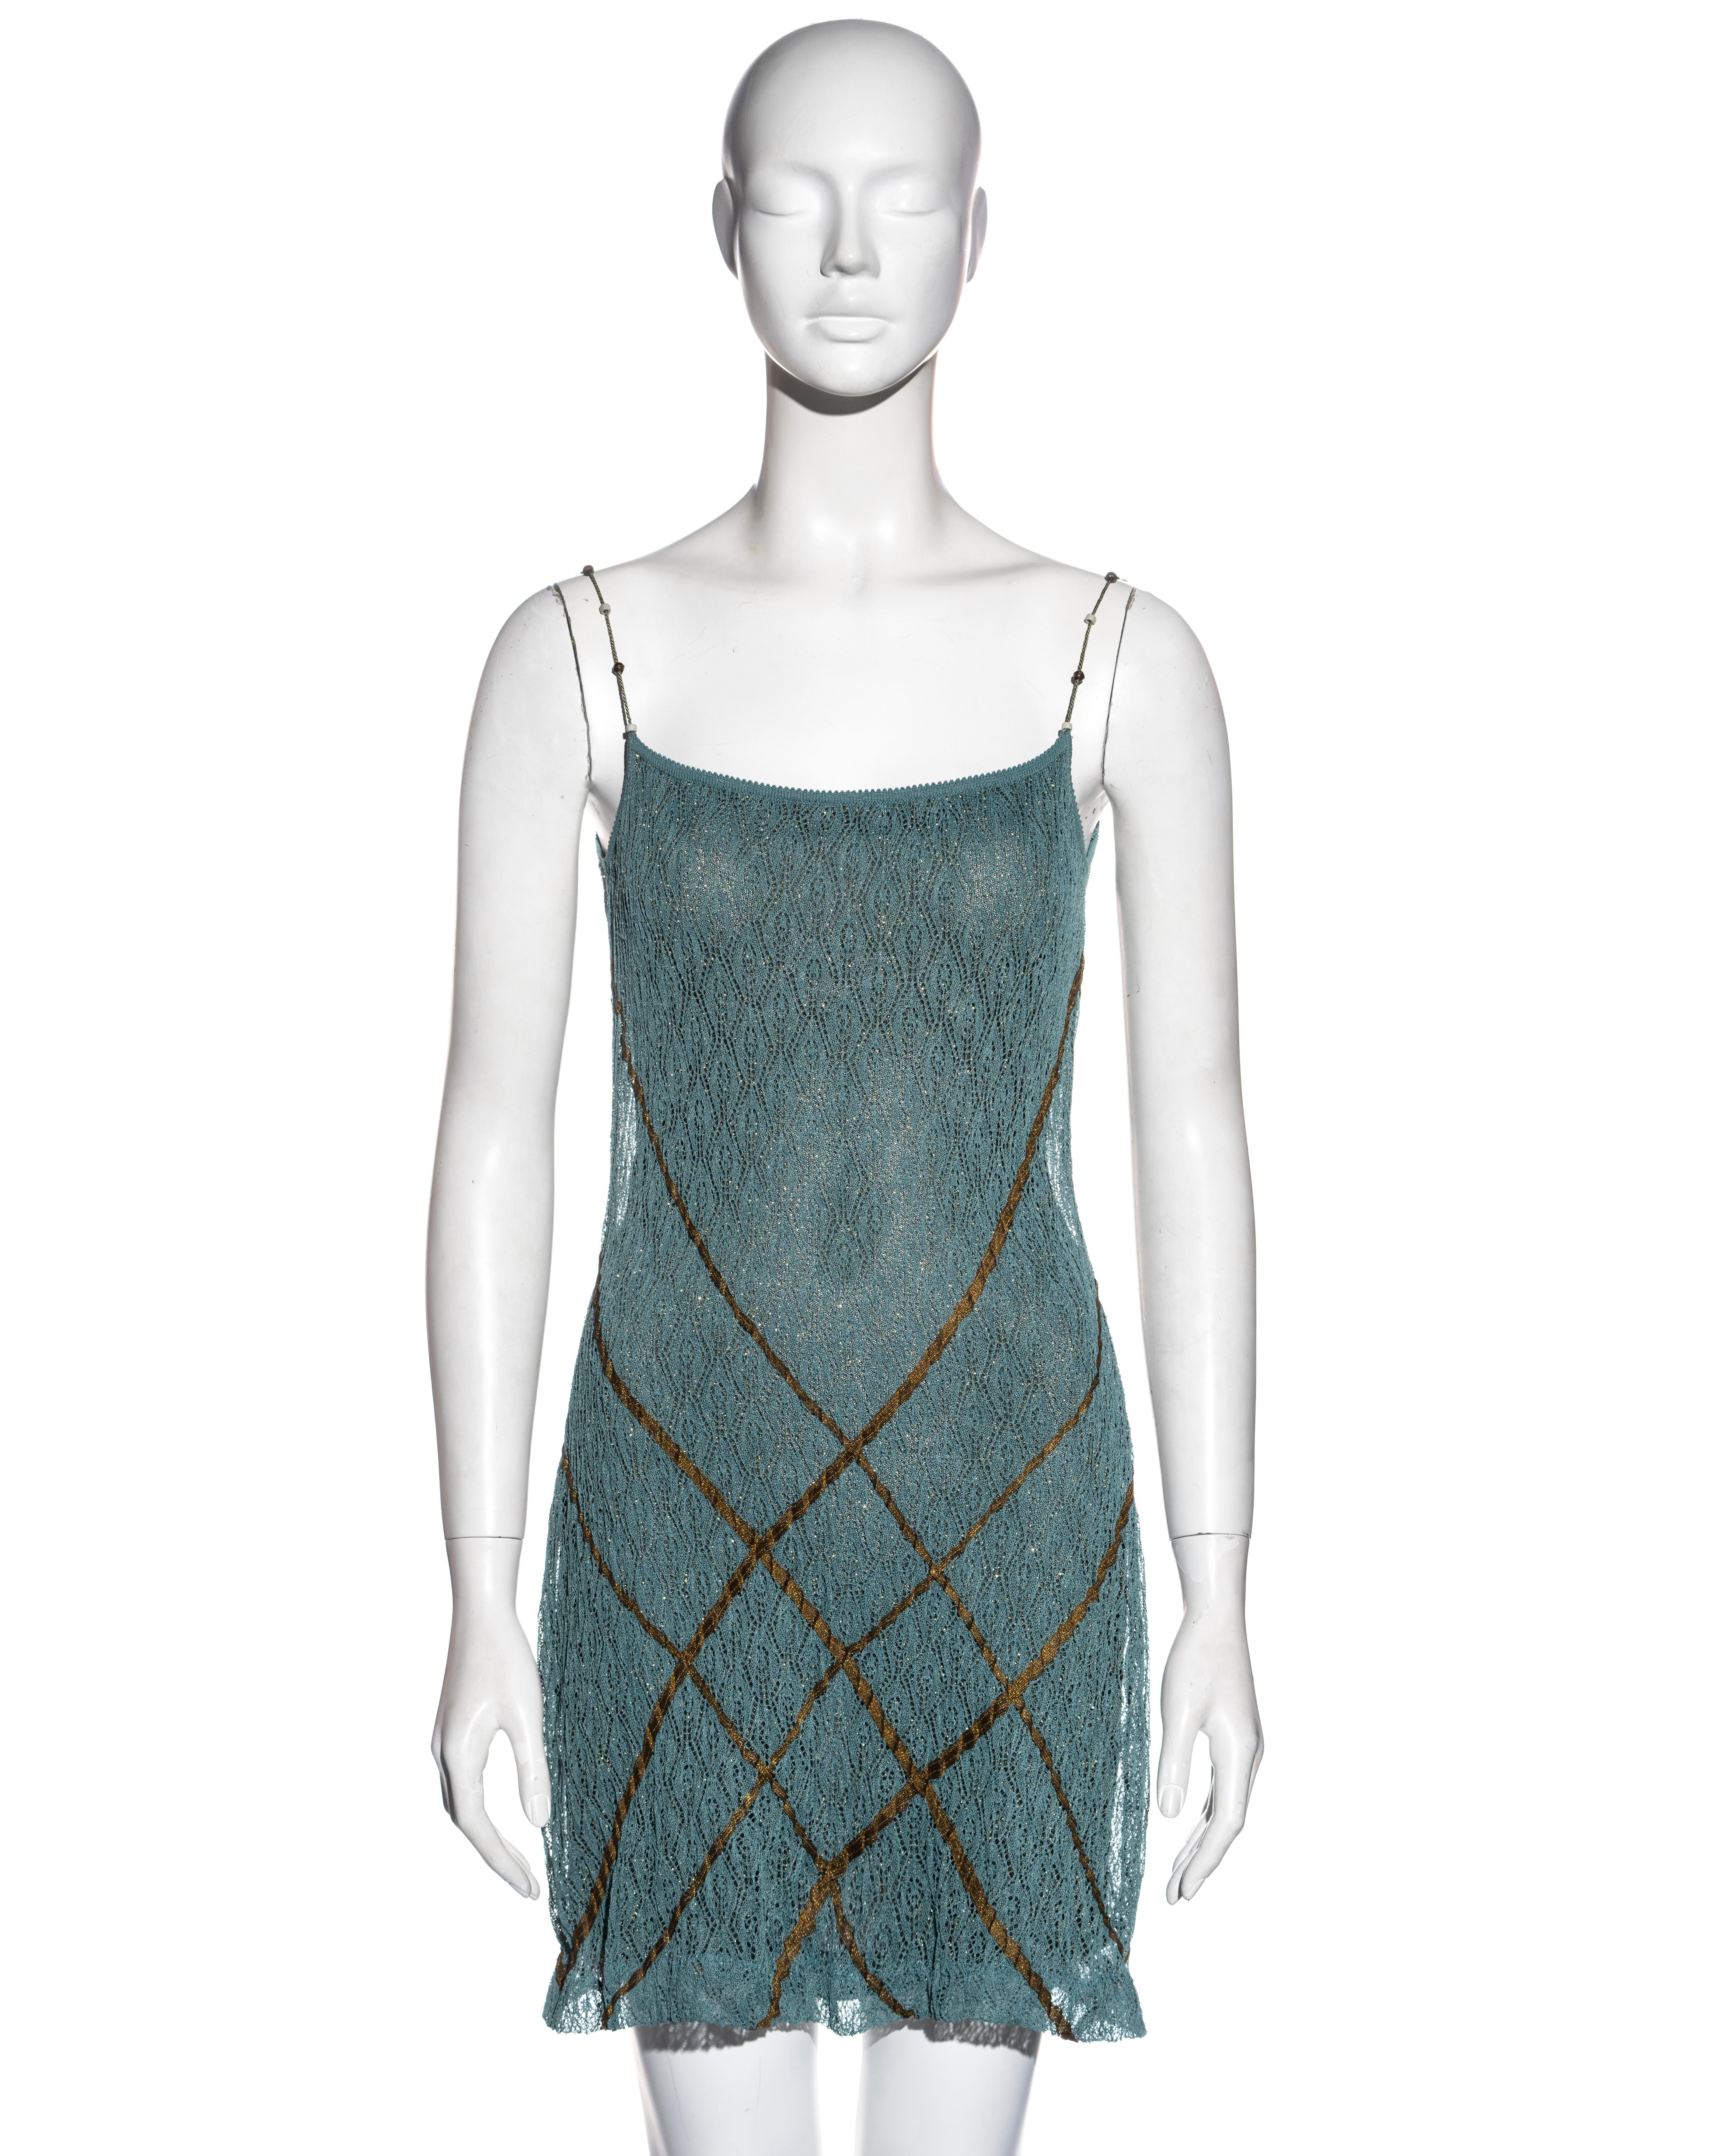 ▪ Christian Dior teal slip dress
▪ Designed by John Galliano 
▪ Double-layered
▪ Fine knitted lace 
▪ Antique gold lamé ribbon criss-cross appliqués 
▪ Gold lurex underdress 
▪ Two-tone string cord shoulder straps with antique beads 
▪ Size Medium